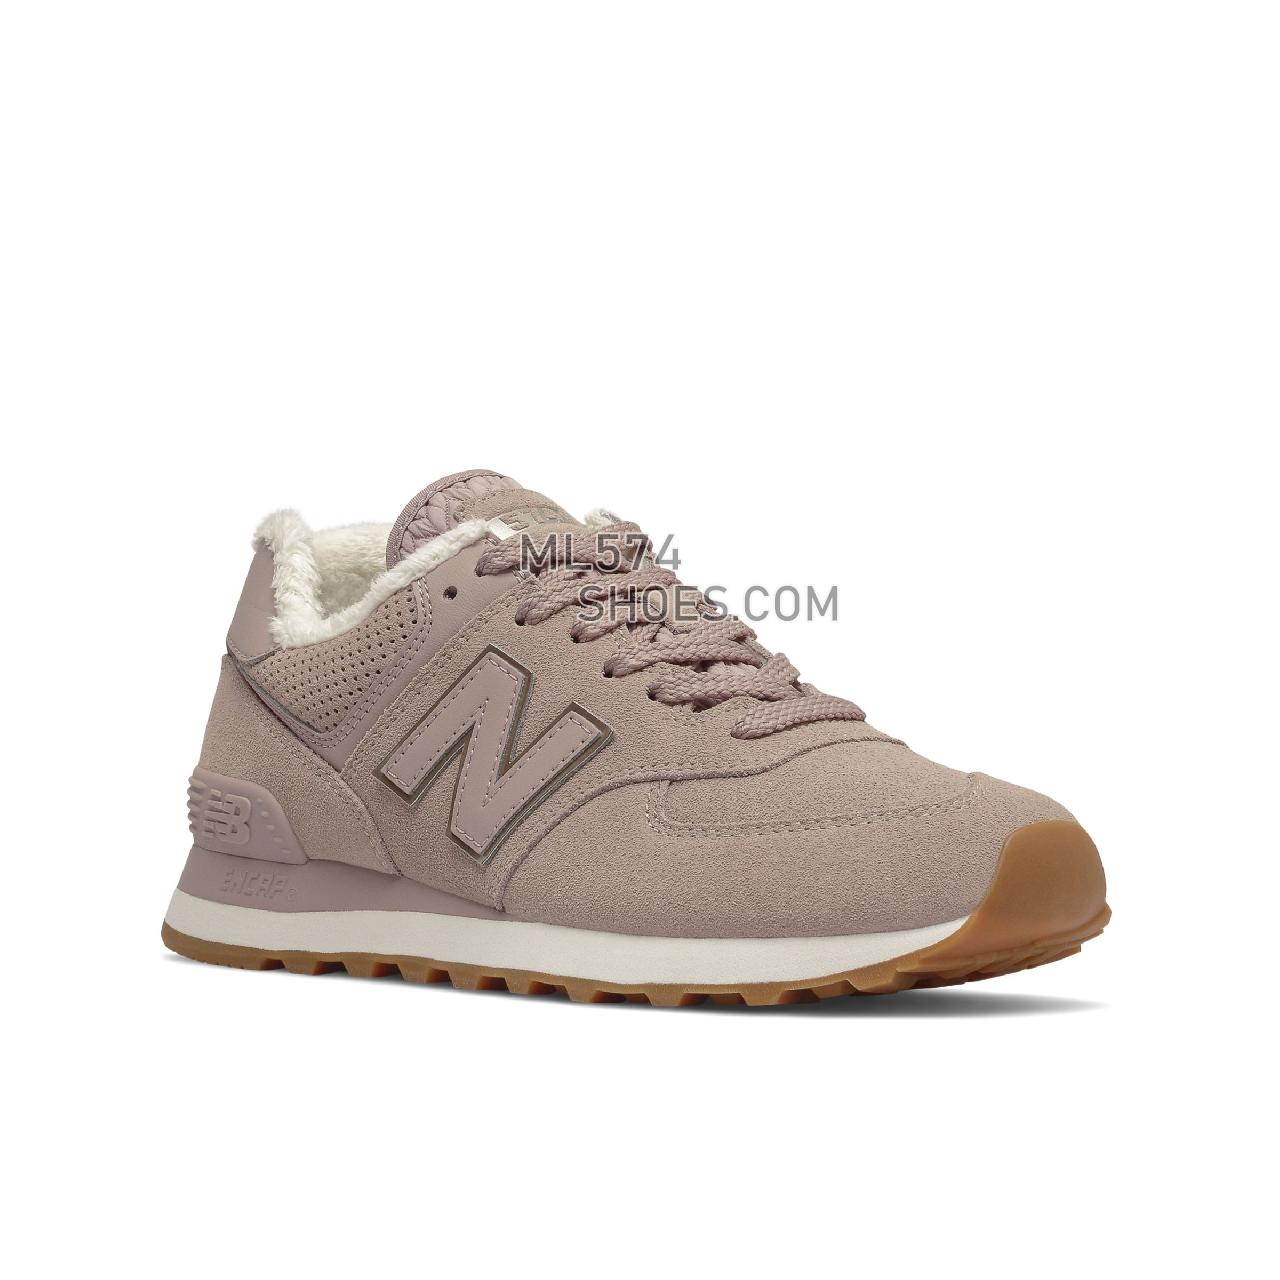 New Balance 574 - Women's Classic Sneakers - Au Lait with Gold - WL574LW2